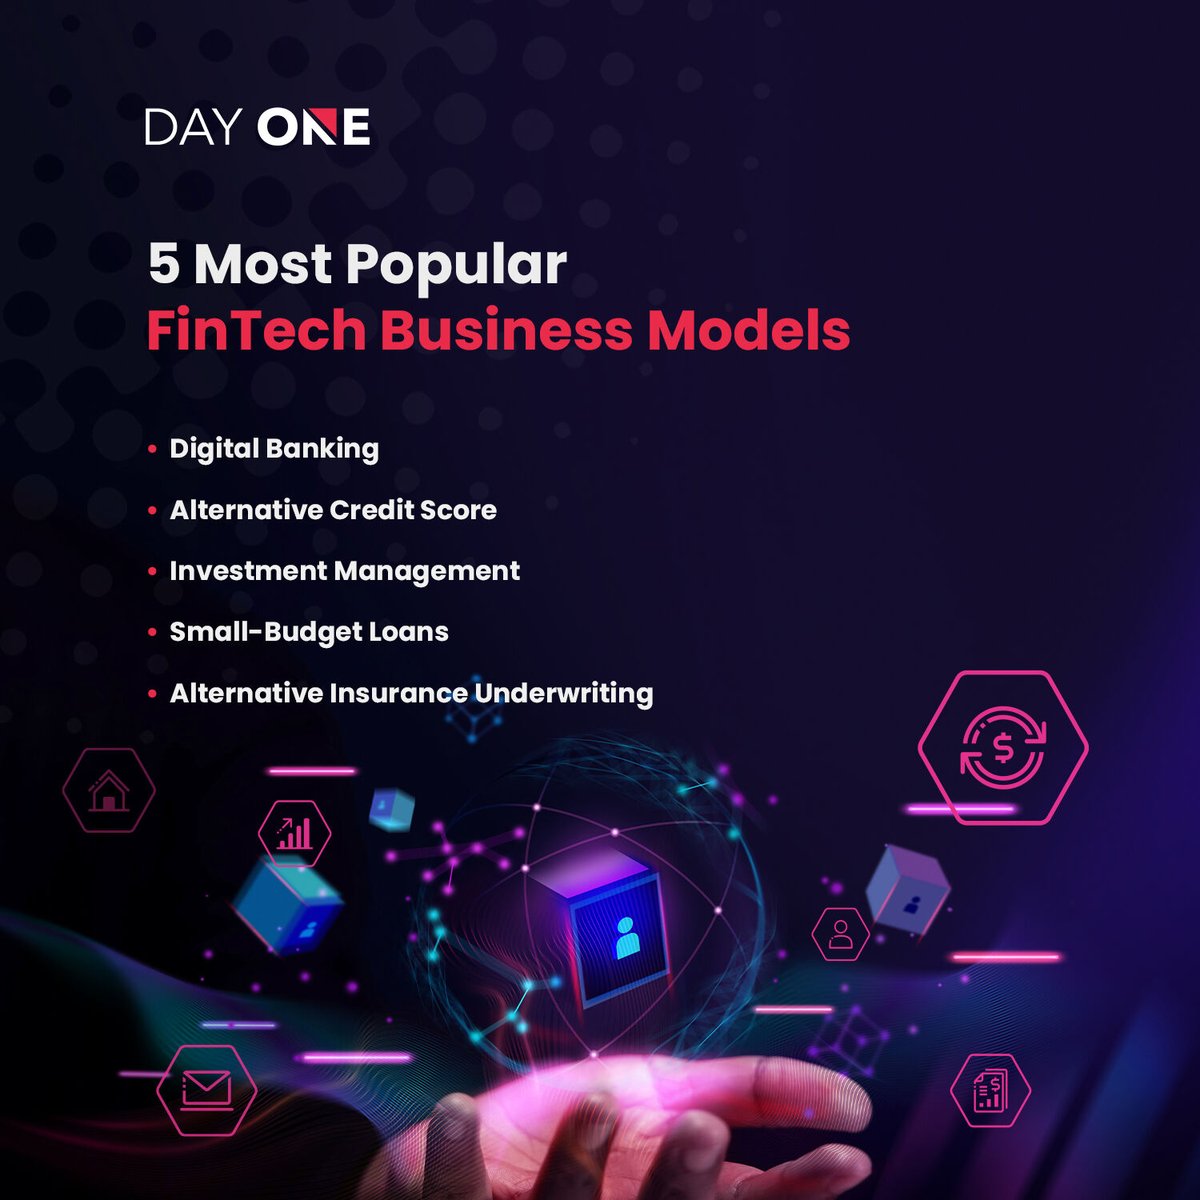 Here are the 5 most popular FinTech business models for startups and enterprises to take advantage of today. #appdevelopment #dayone #dayonetech #appdevelopmentcompany #fintech #fintechapp #businessmodels